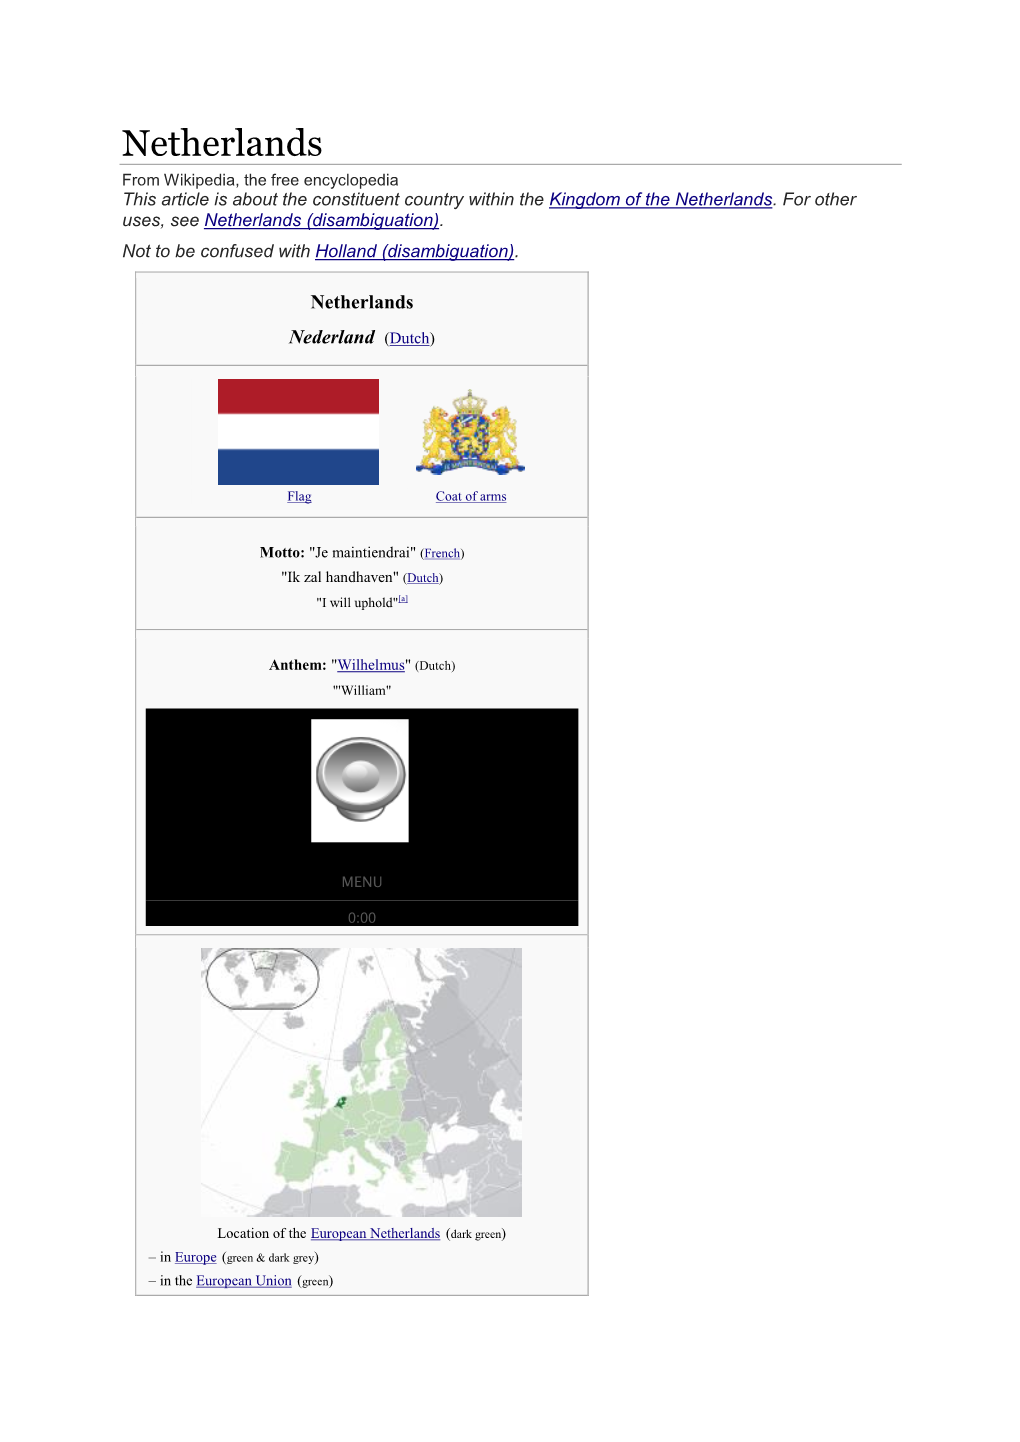 Netherlands from Wikipedia, the Free Encyclopedia This Article Is About the Constituent Country Within the Kingdom of the Netherlands